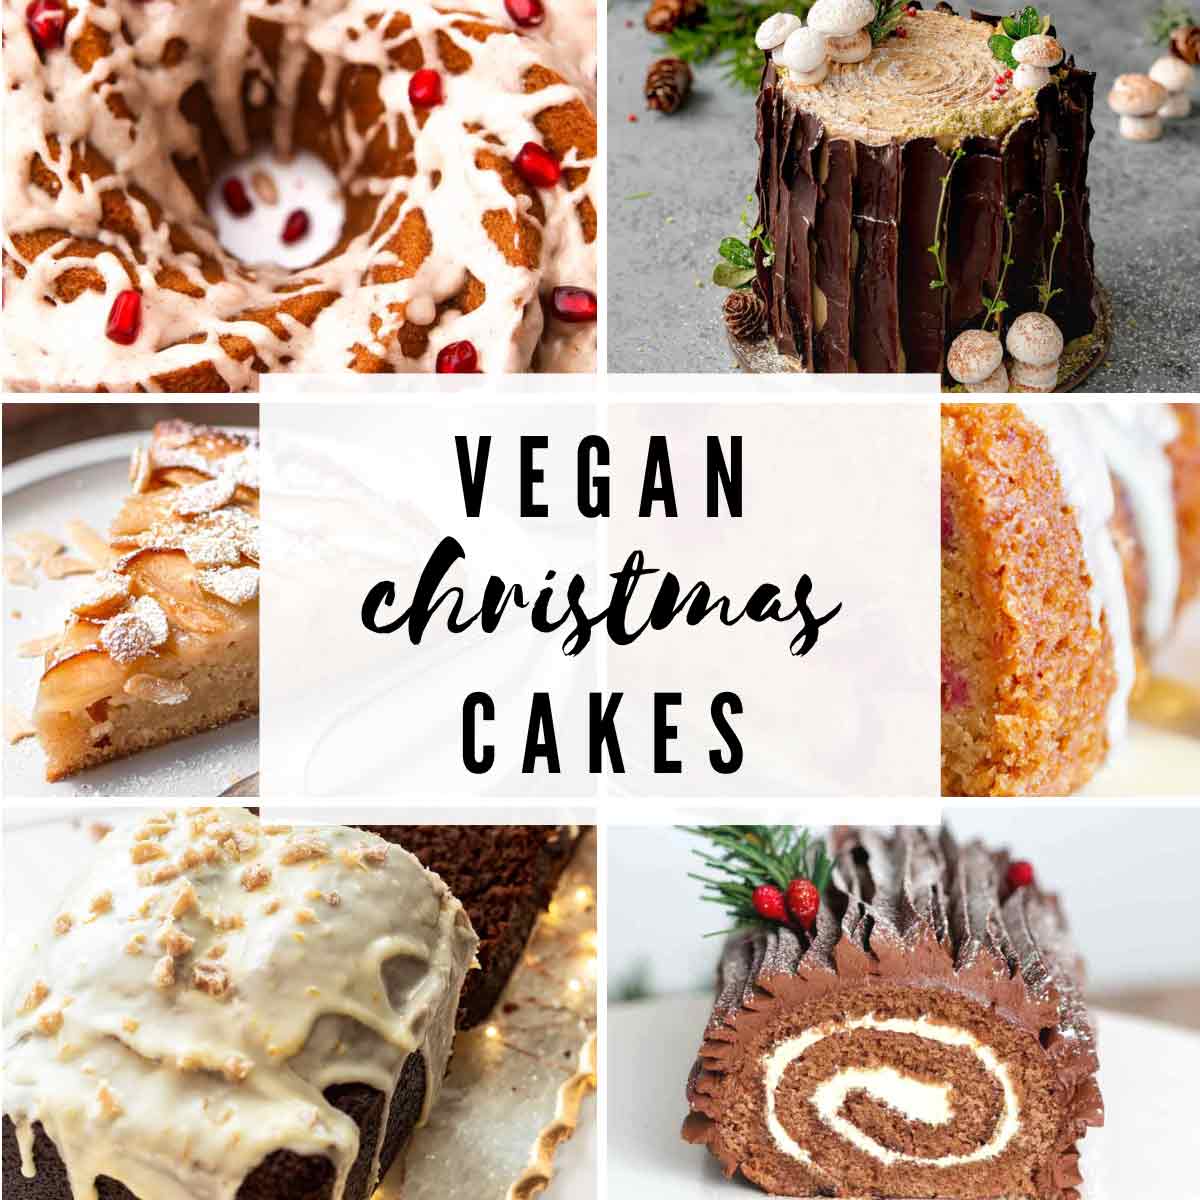 Image Collage Of 6 Vegan Christmas Cakes With Text Overlay